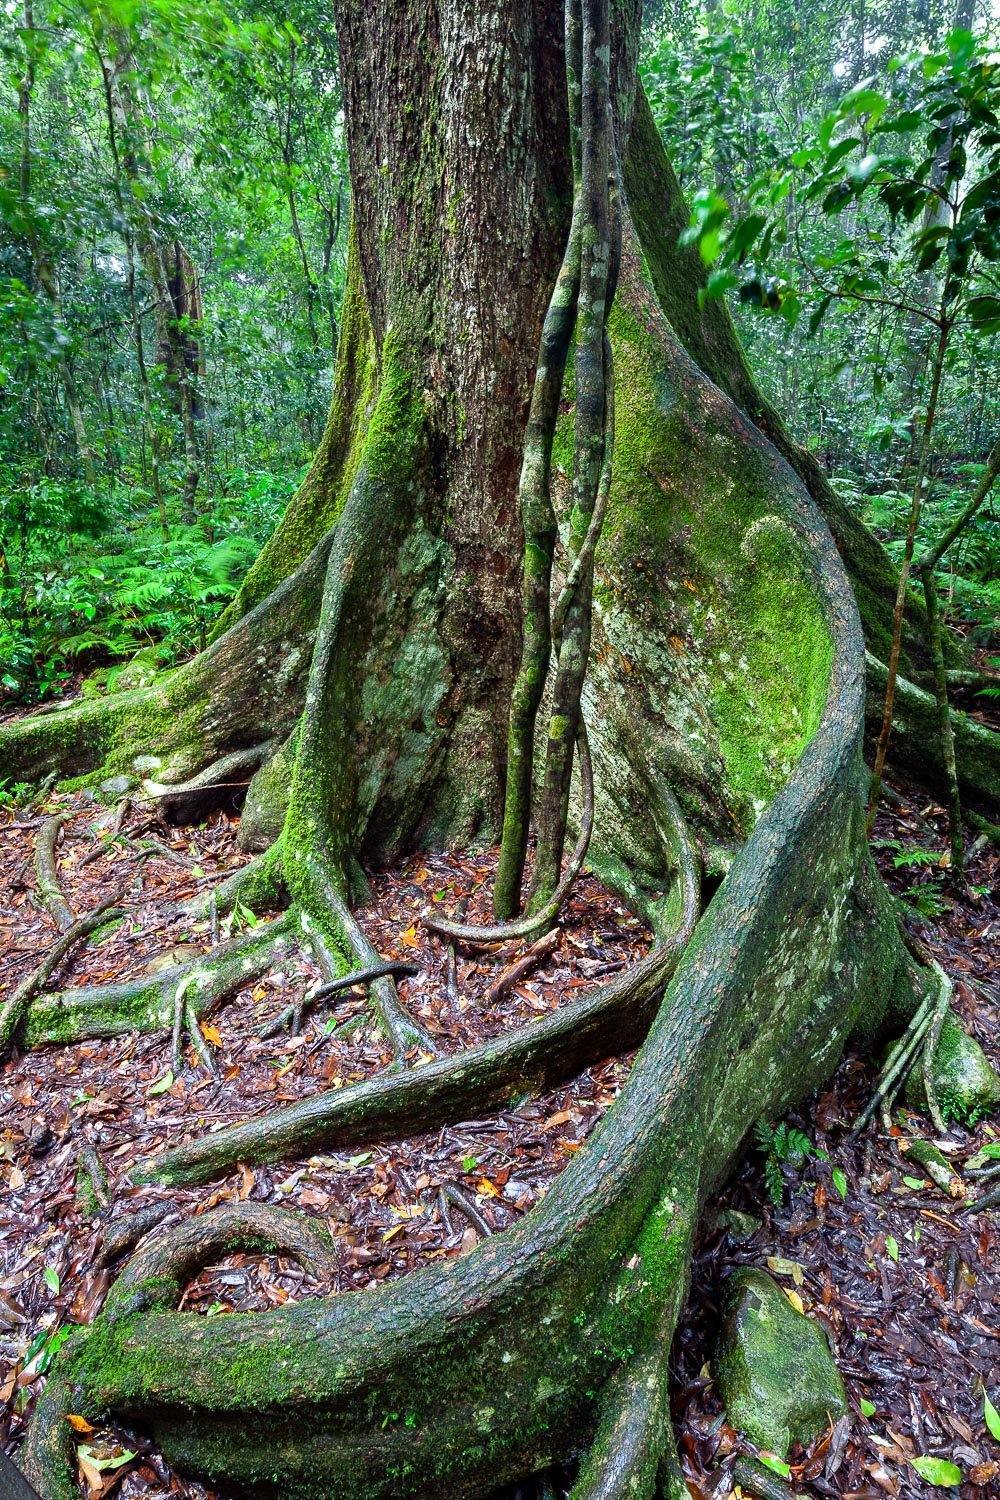 Long tree stems spread on the ground, Lamington Buttress - QLD